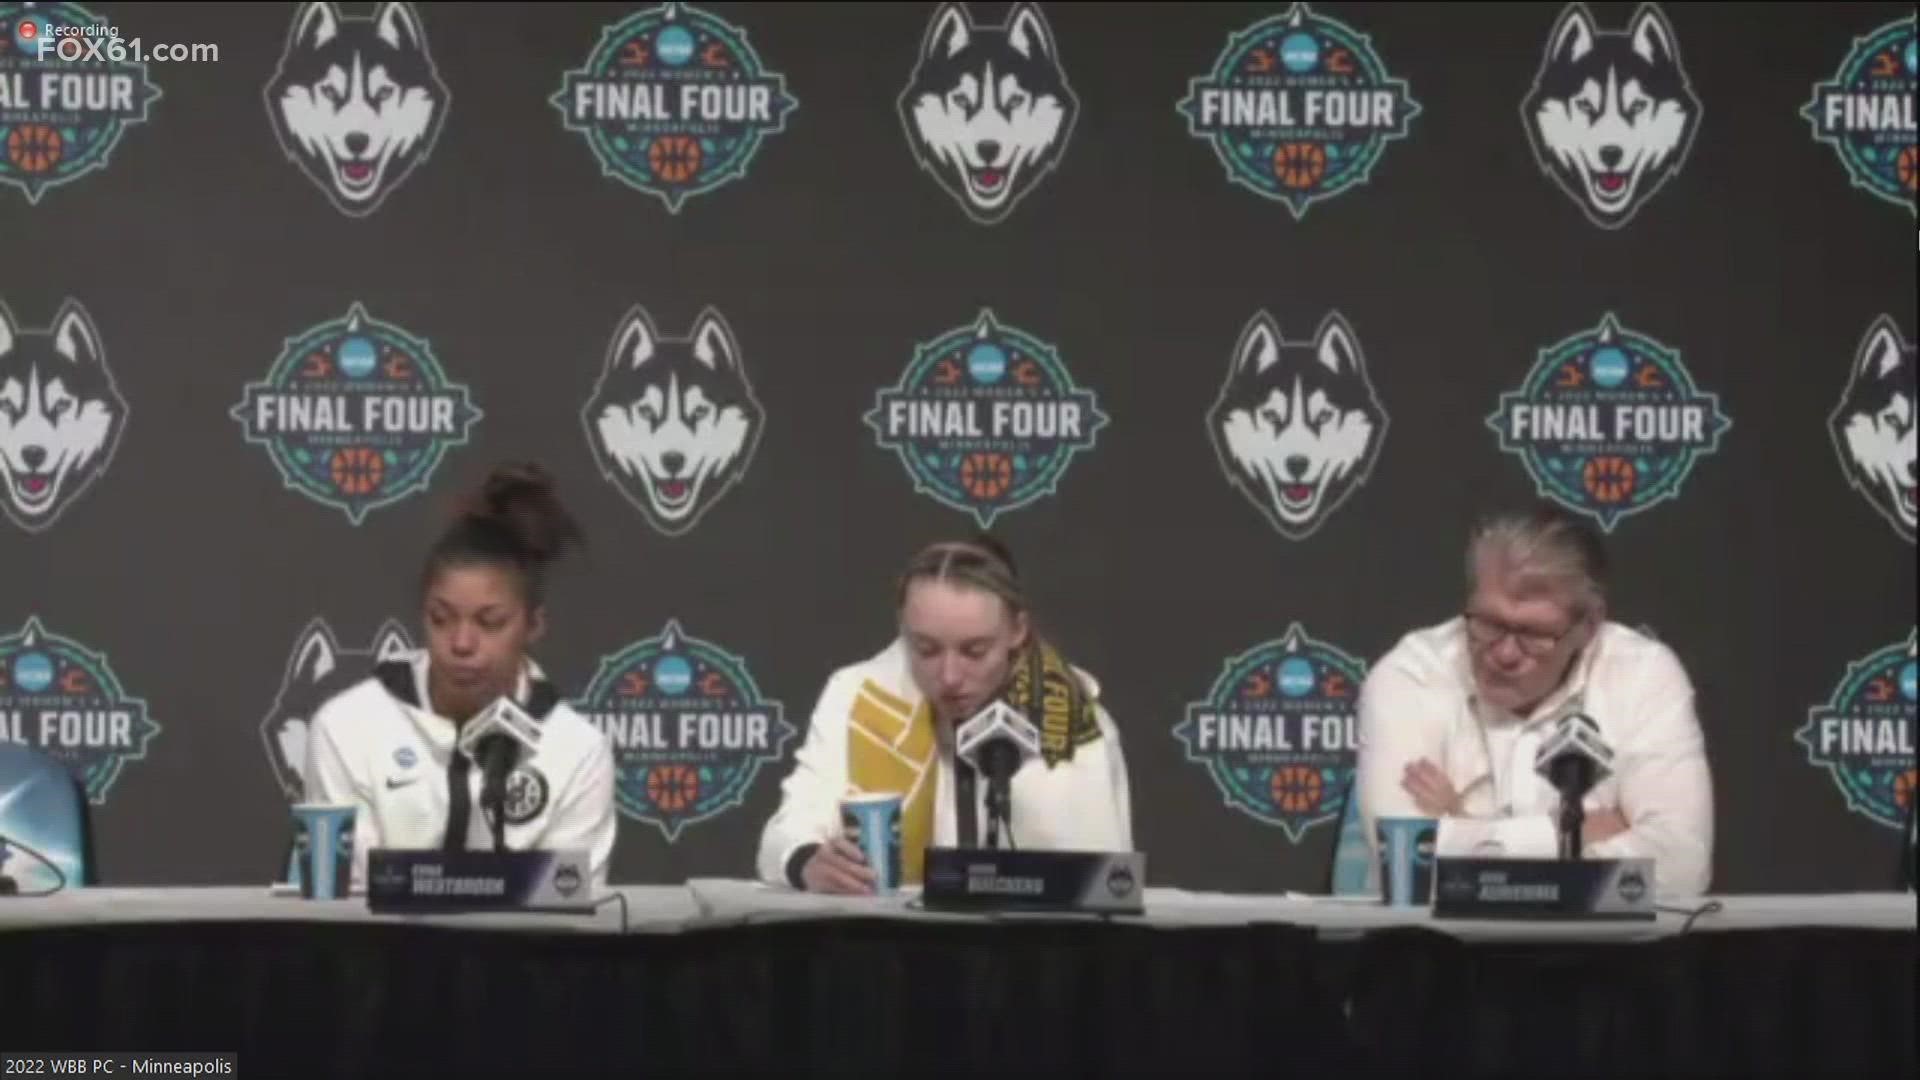 This is the first national championship loss from the UConn Huskies.